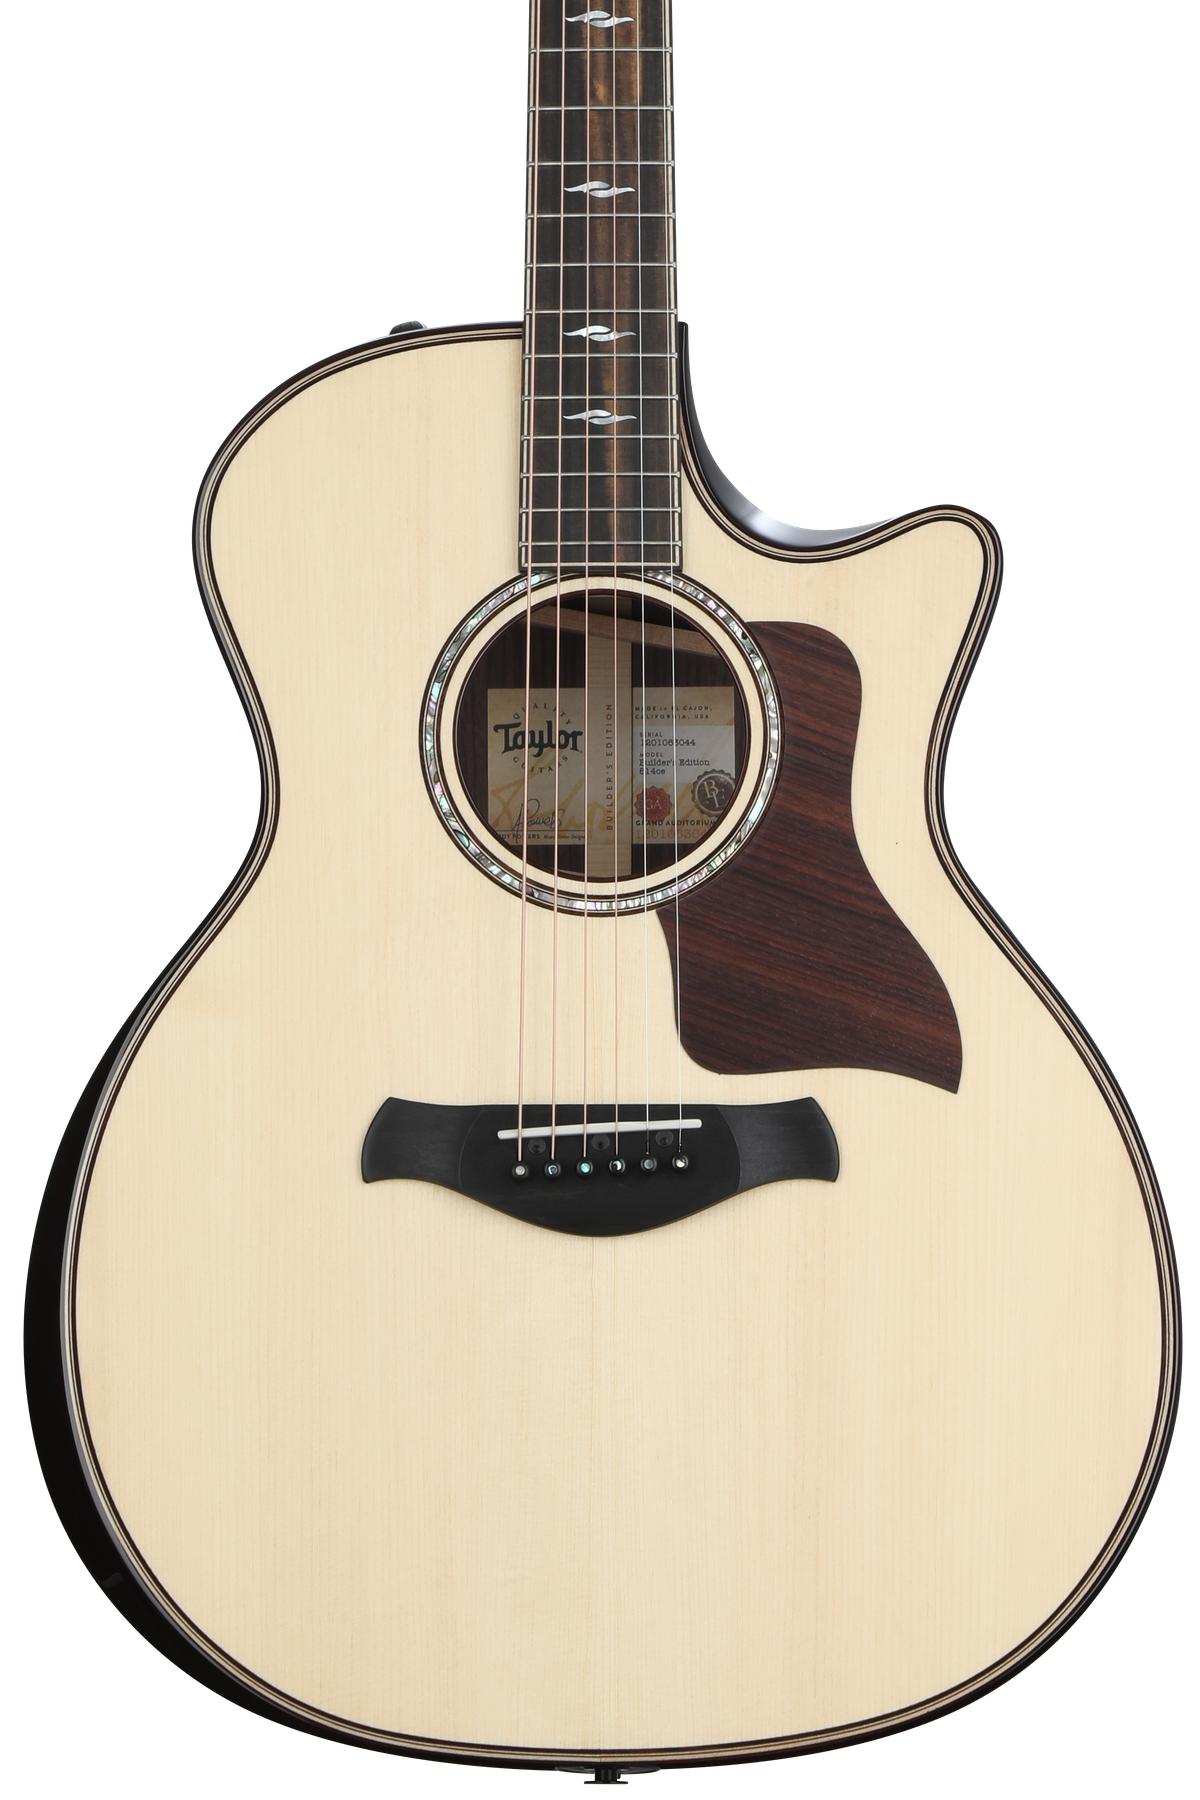 Taylor 814ce Builder's Edition Acoustic-electric Guitar - Natural Gloss